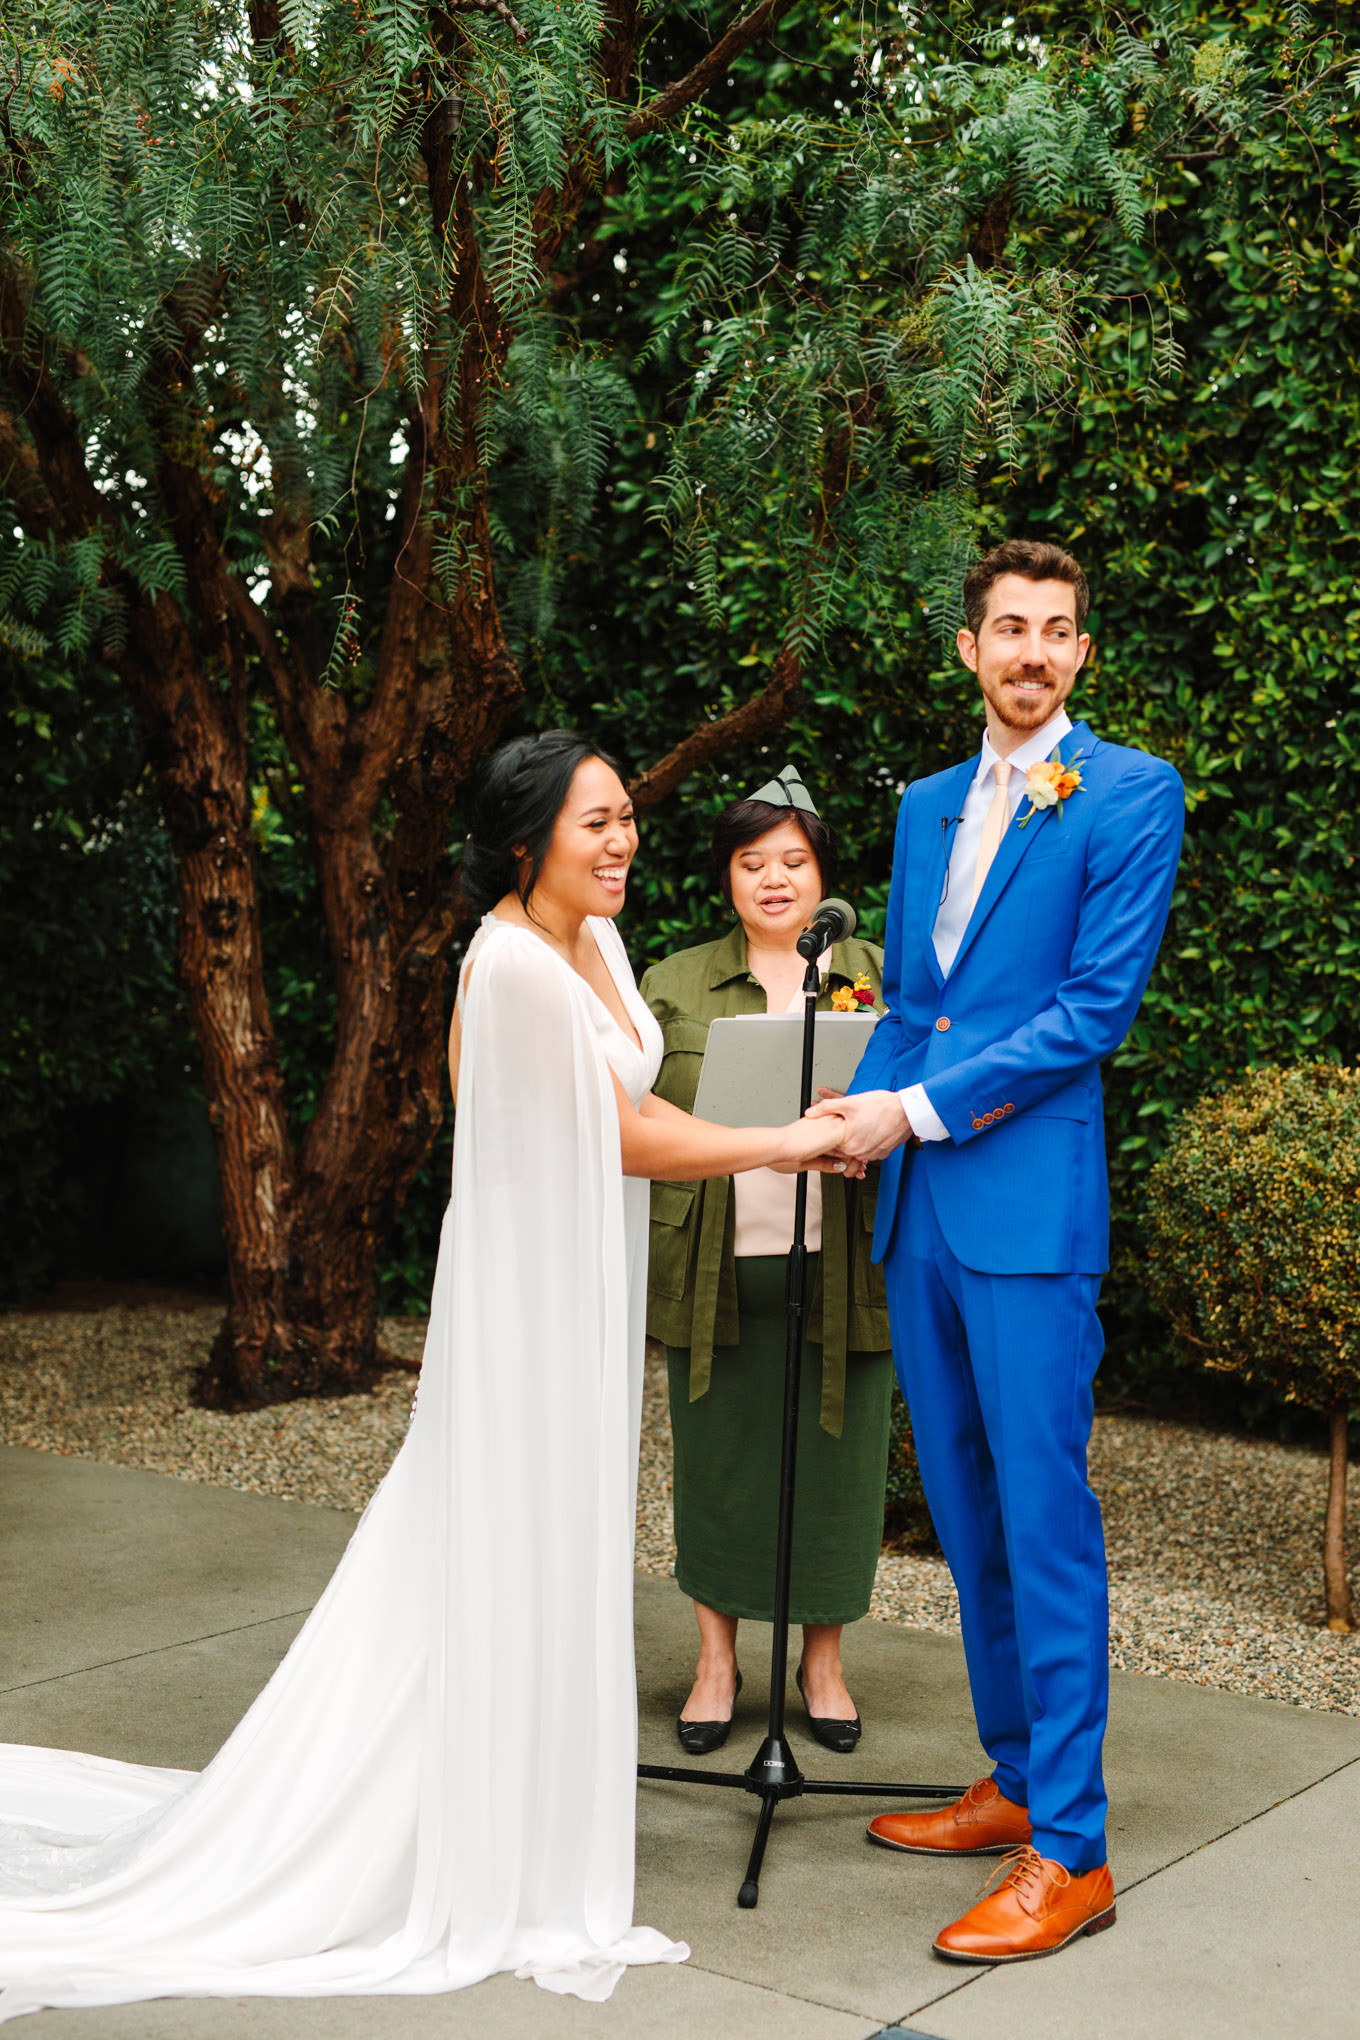 Wedding ceremony with officiant dressed as Joey from Friends | TV inspired wedding at The Fig House Los Angeles | Published on The Knot | Fresh and colorful photography for fun-loving couples in Southern California | #losangeleswedding #TVwedding #colorfulwedding #theknot   Source: Mary Costa Photography | Los Angeles wedding photographer